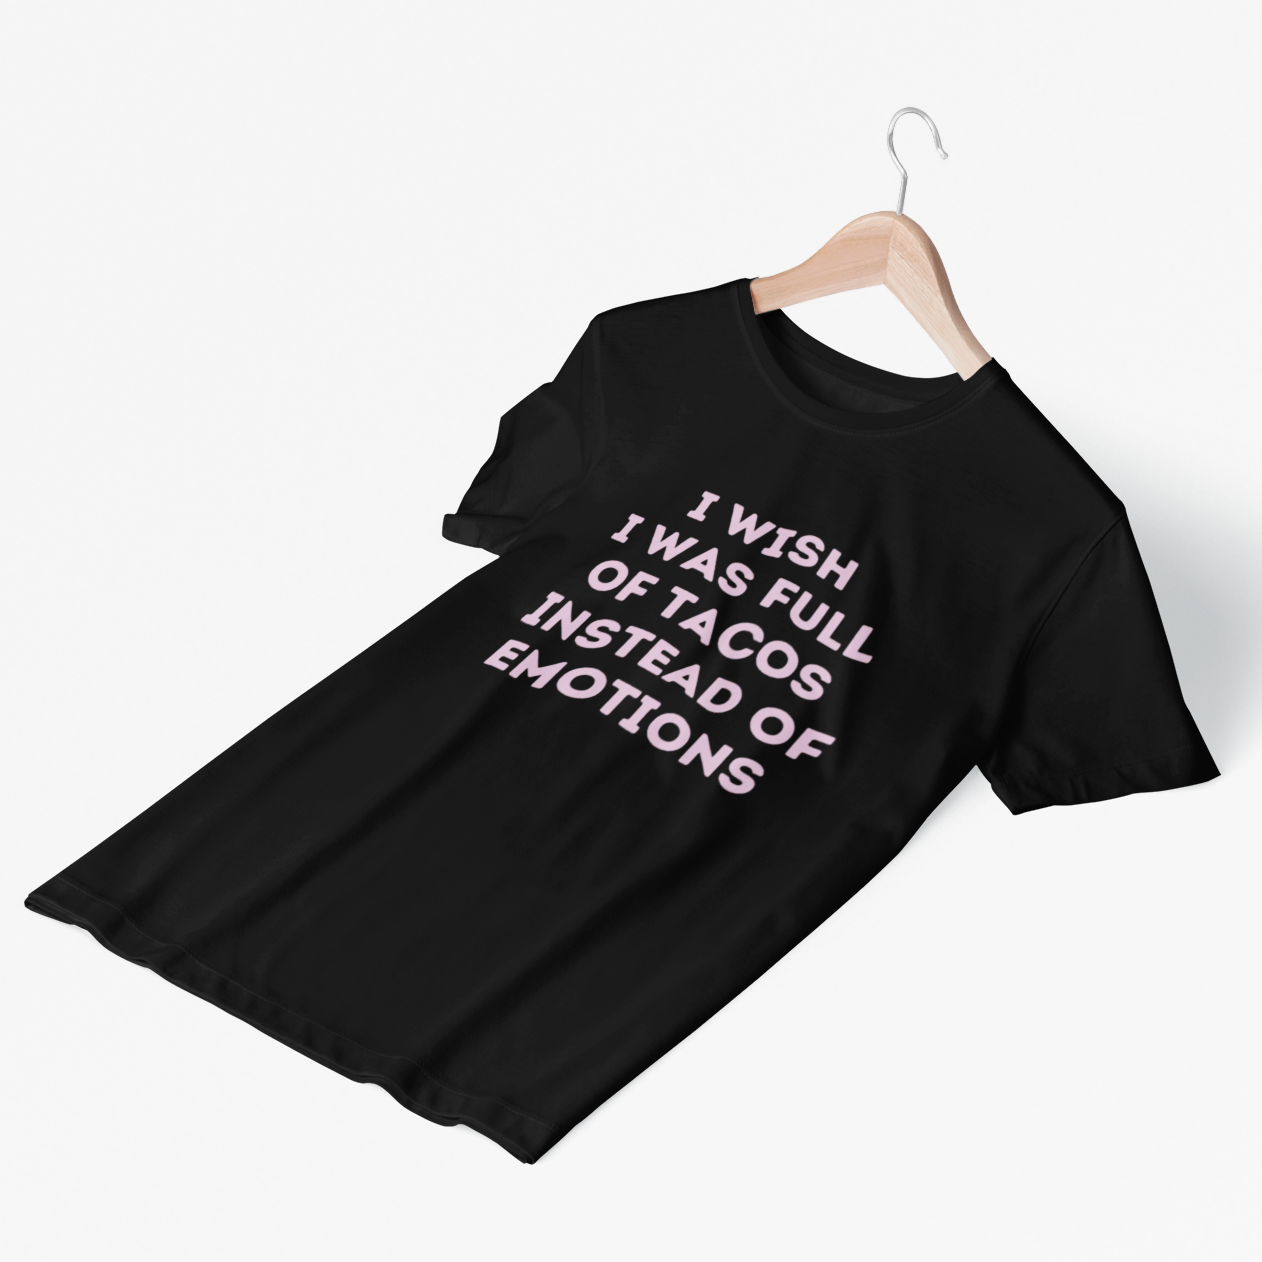 Funny black t-shirt for latina women and taco lovers that states "I wish I was full of tacos instead of emotions" in vintage pink lettering.